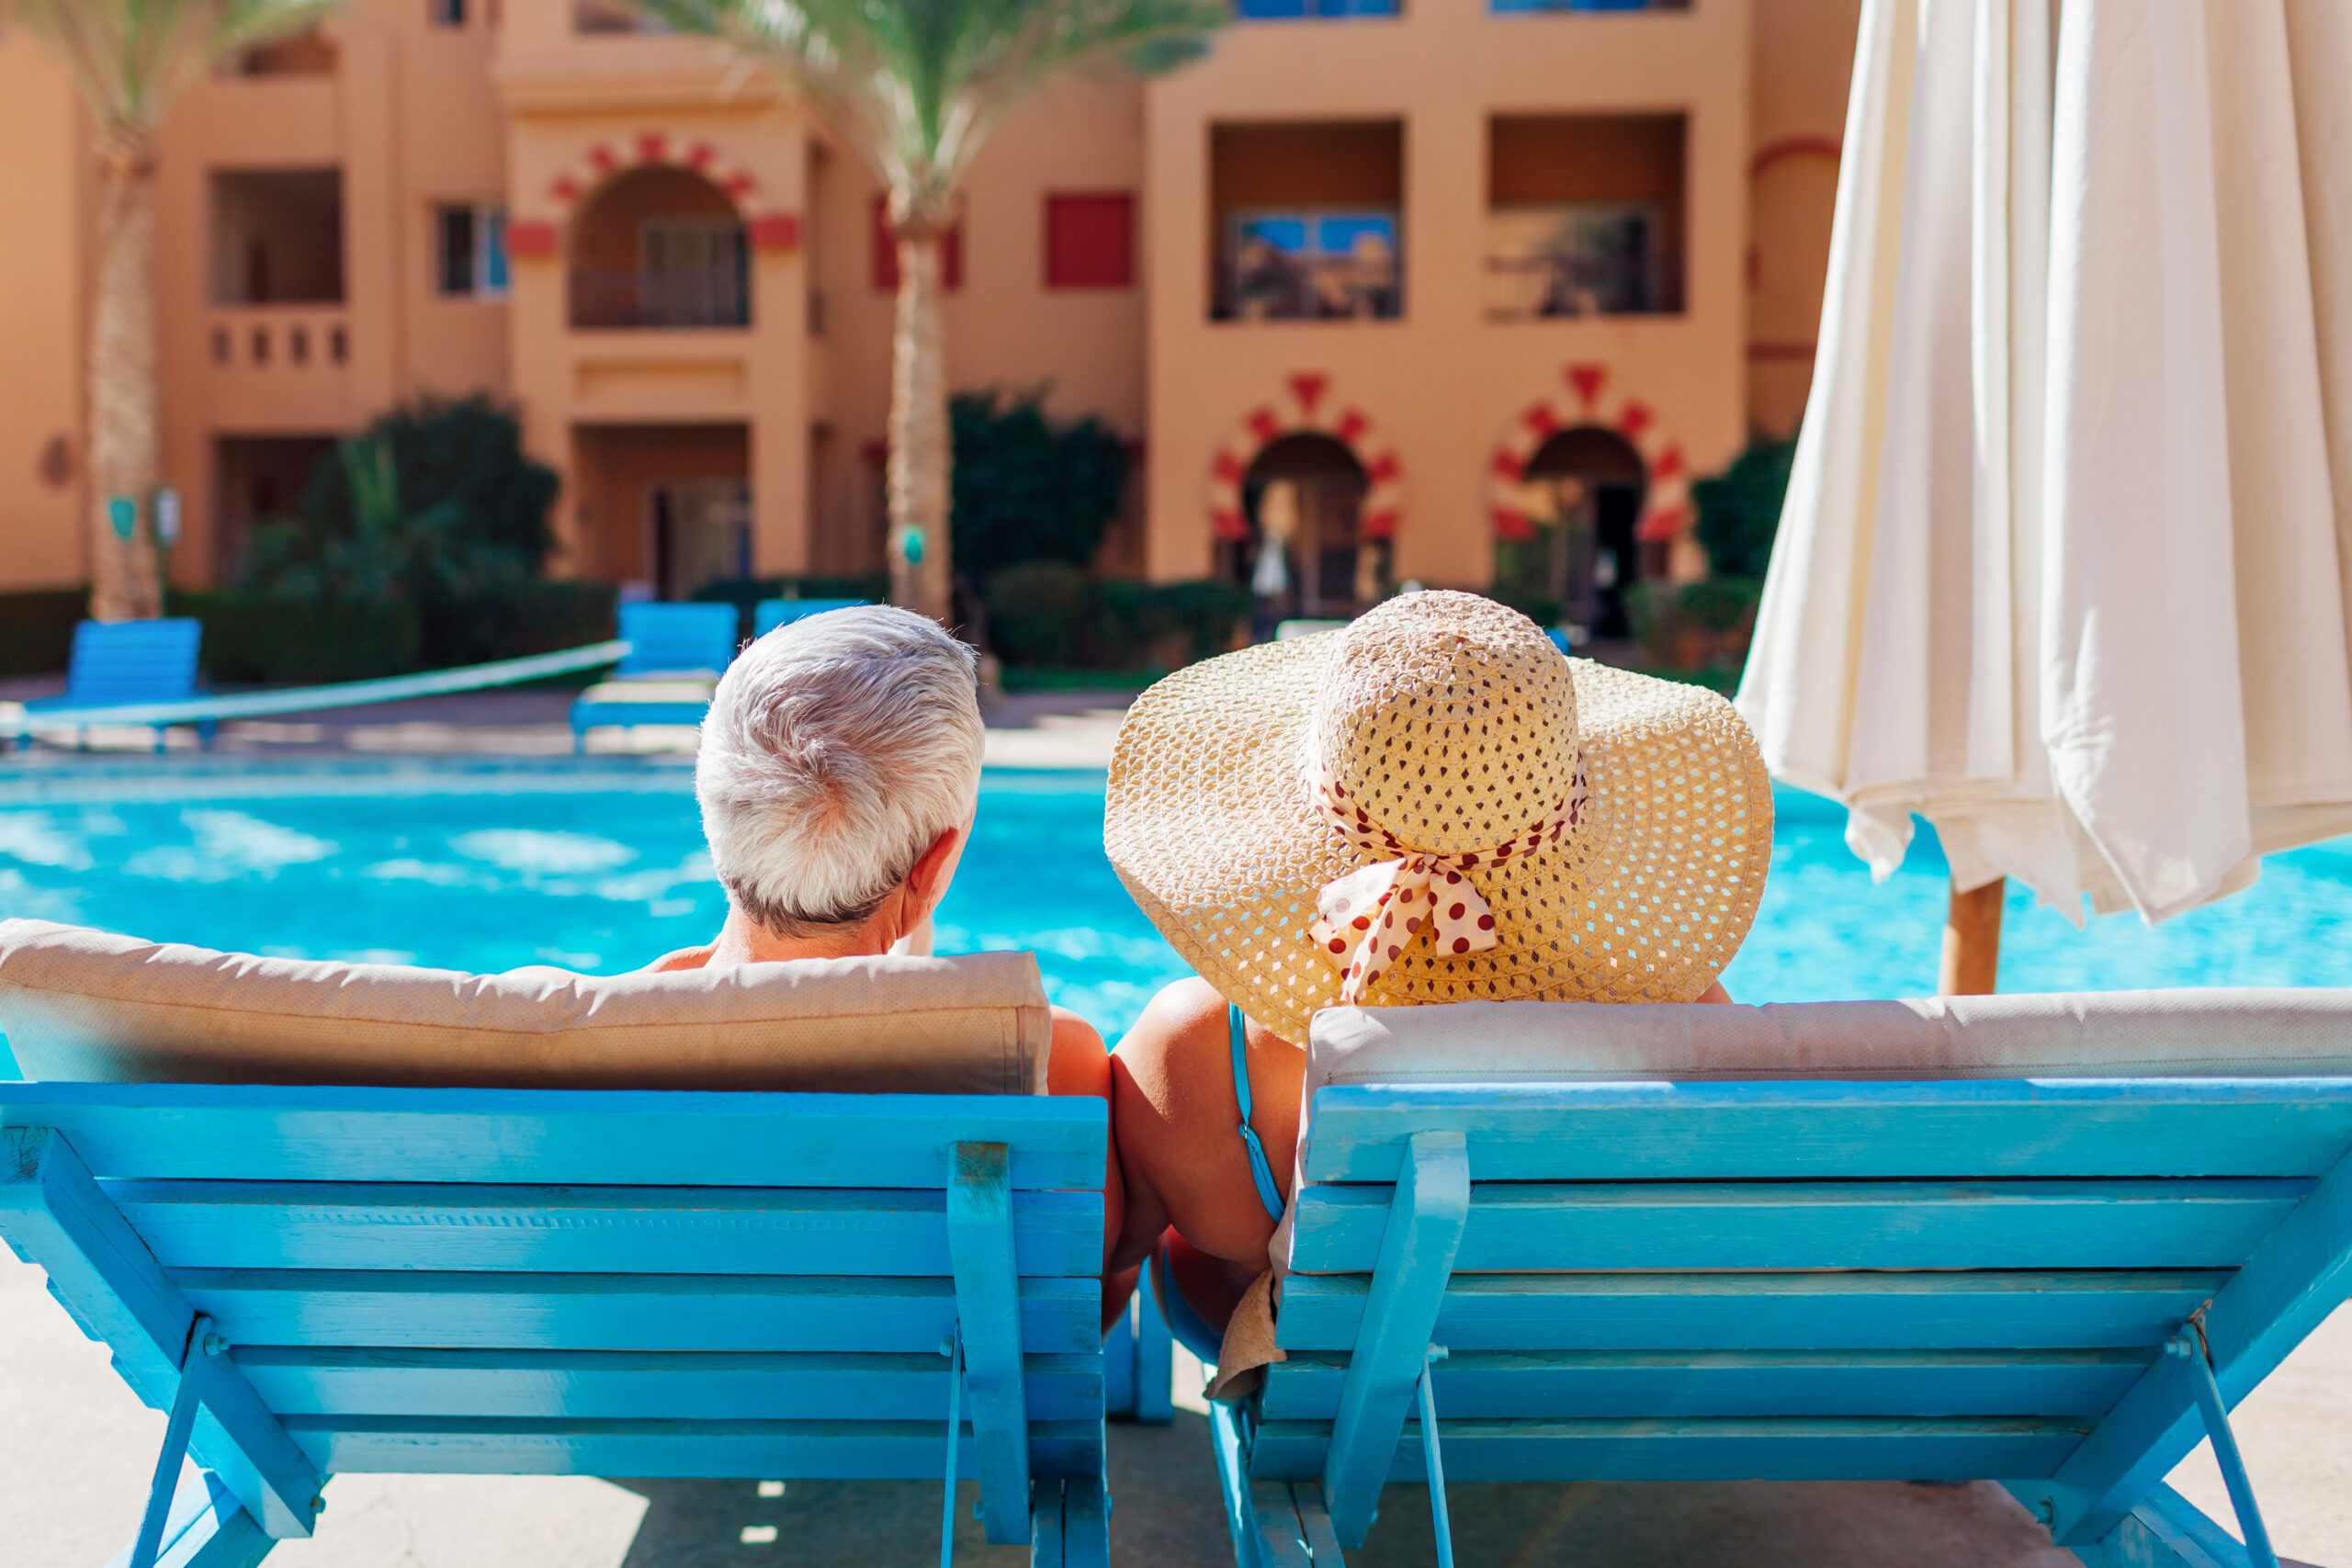 Senior couple relaxing by swimming pool lying on chaise-longues. People enjoying vacation.